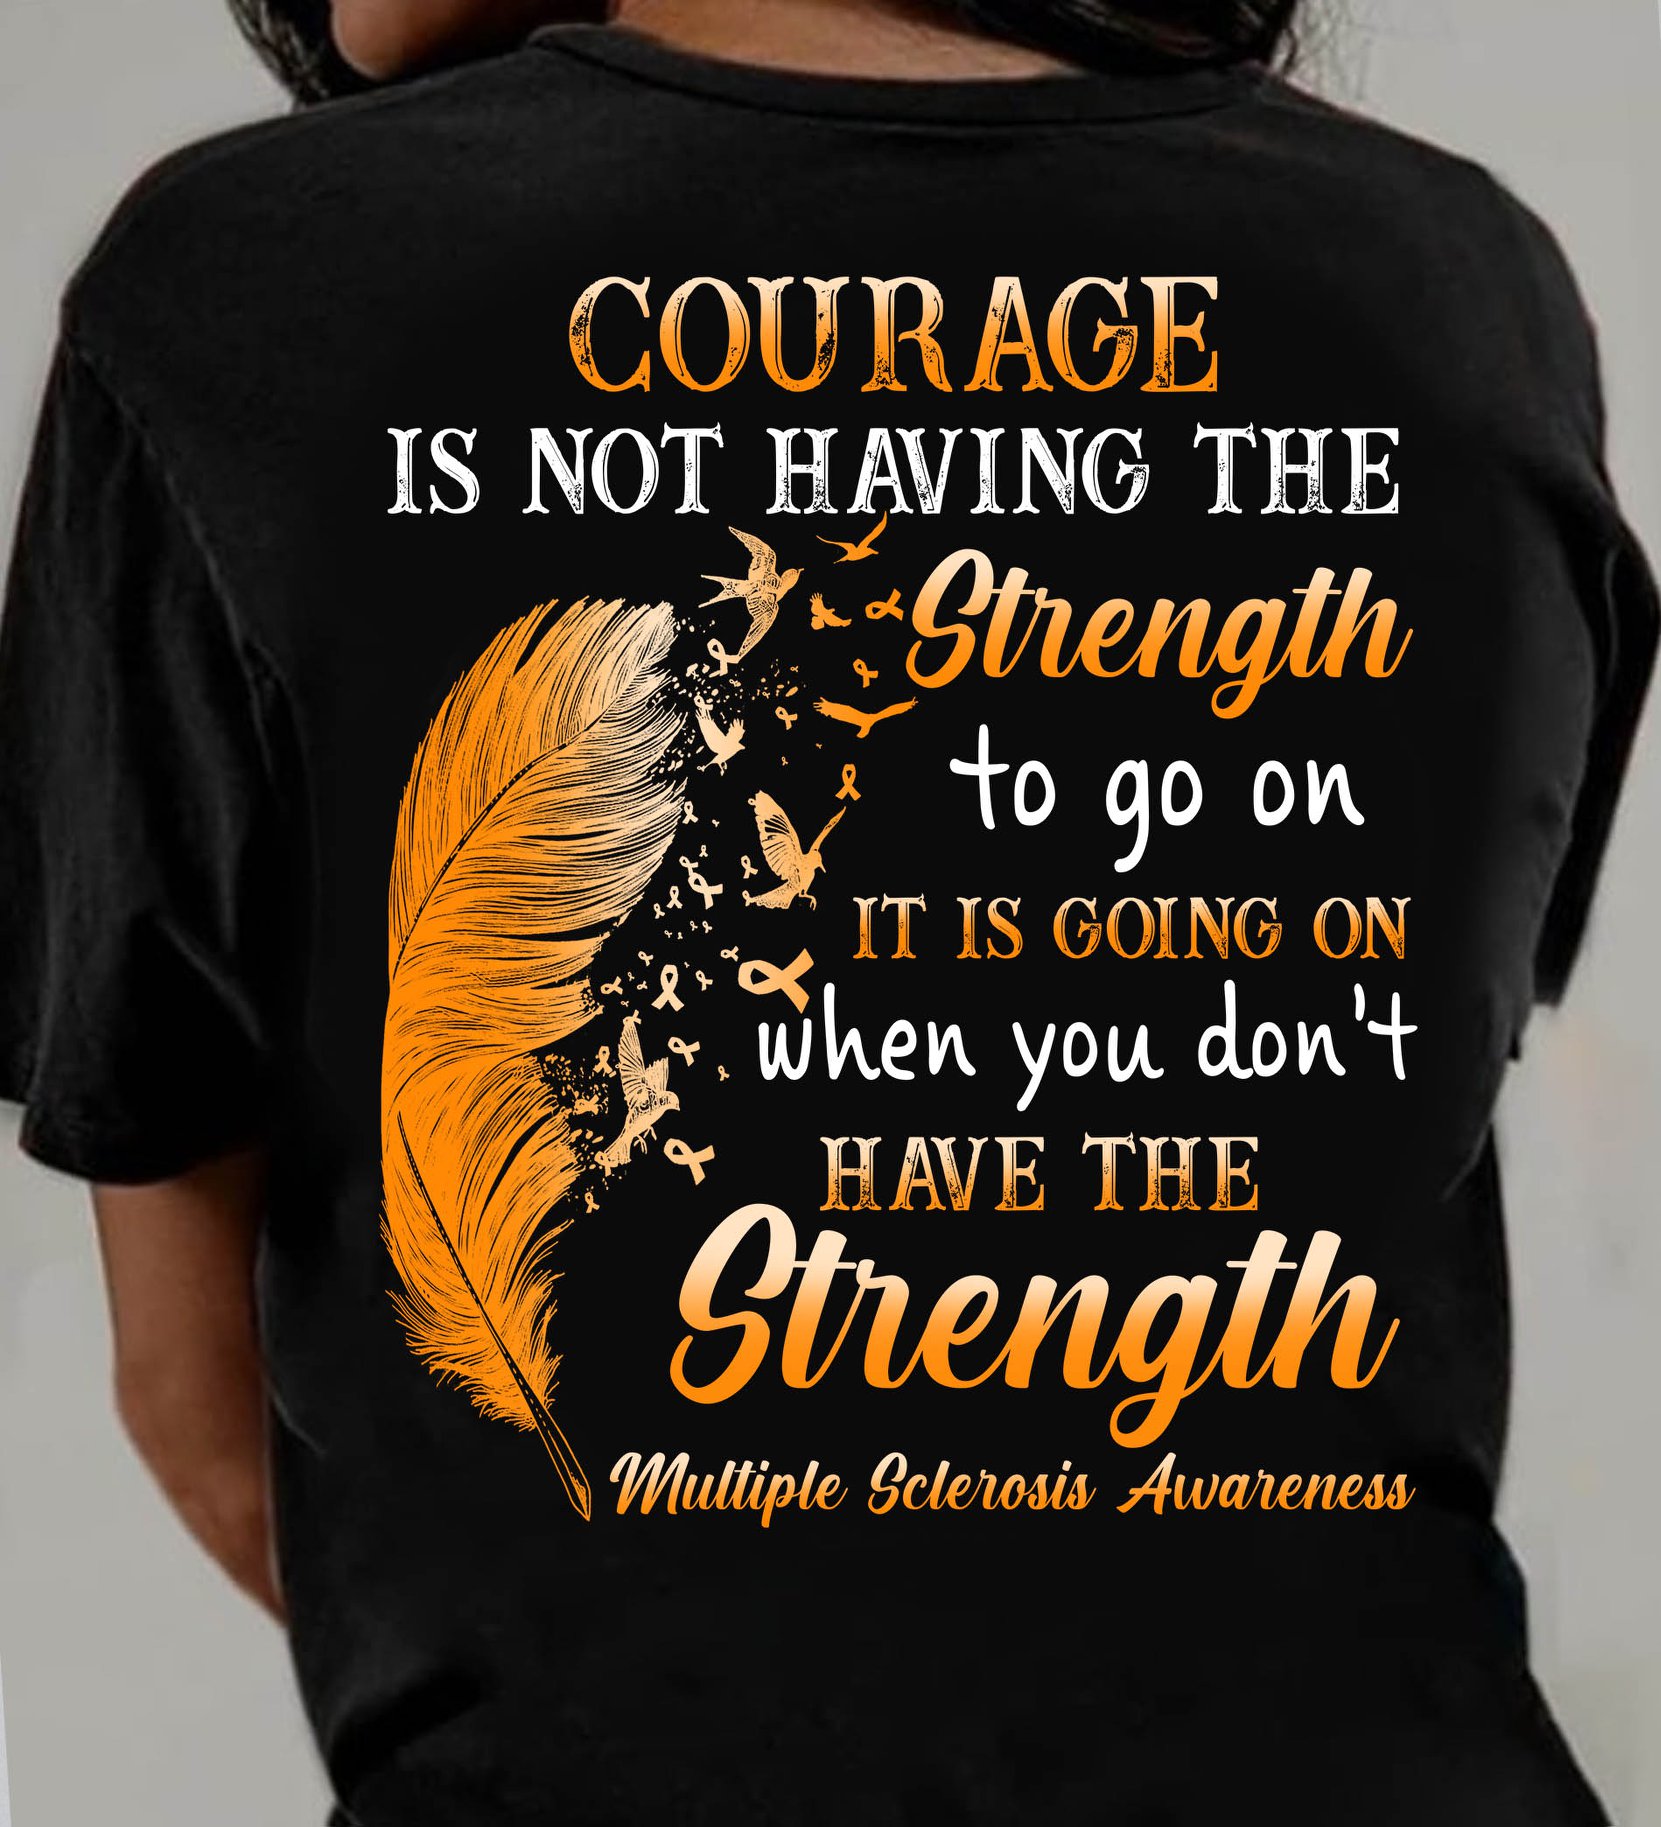 Courage is not having the strength - Multiple sclerosis awareness